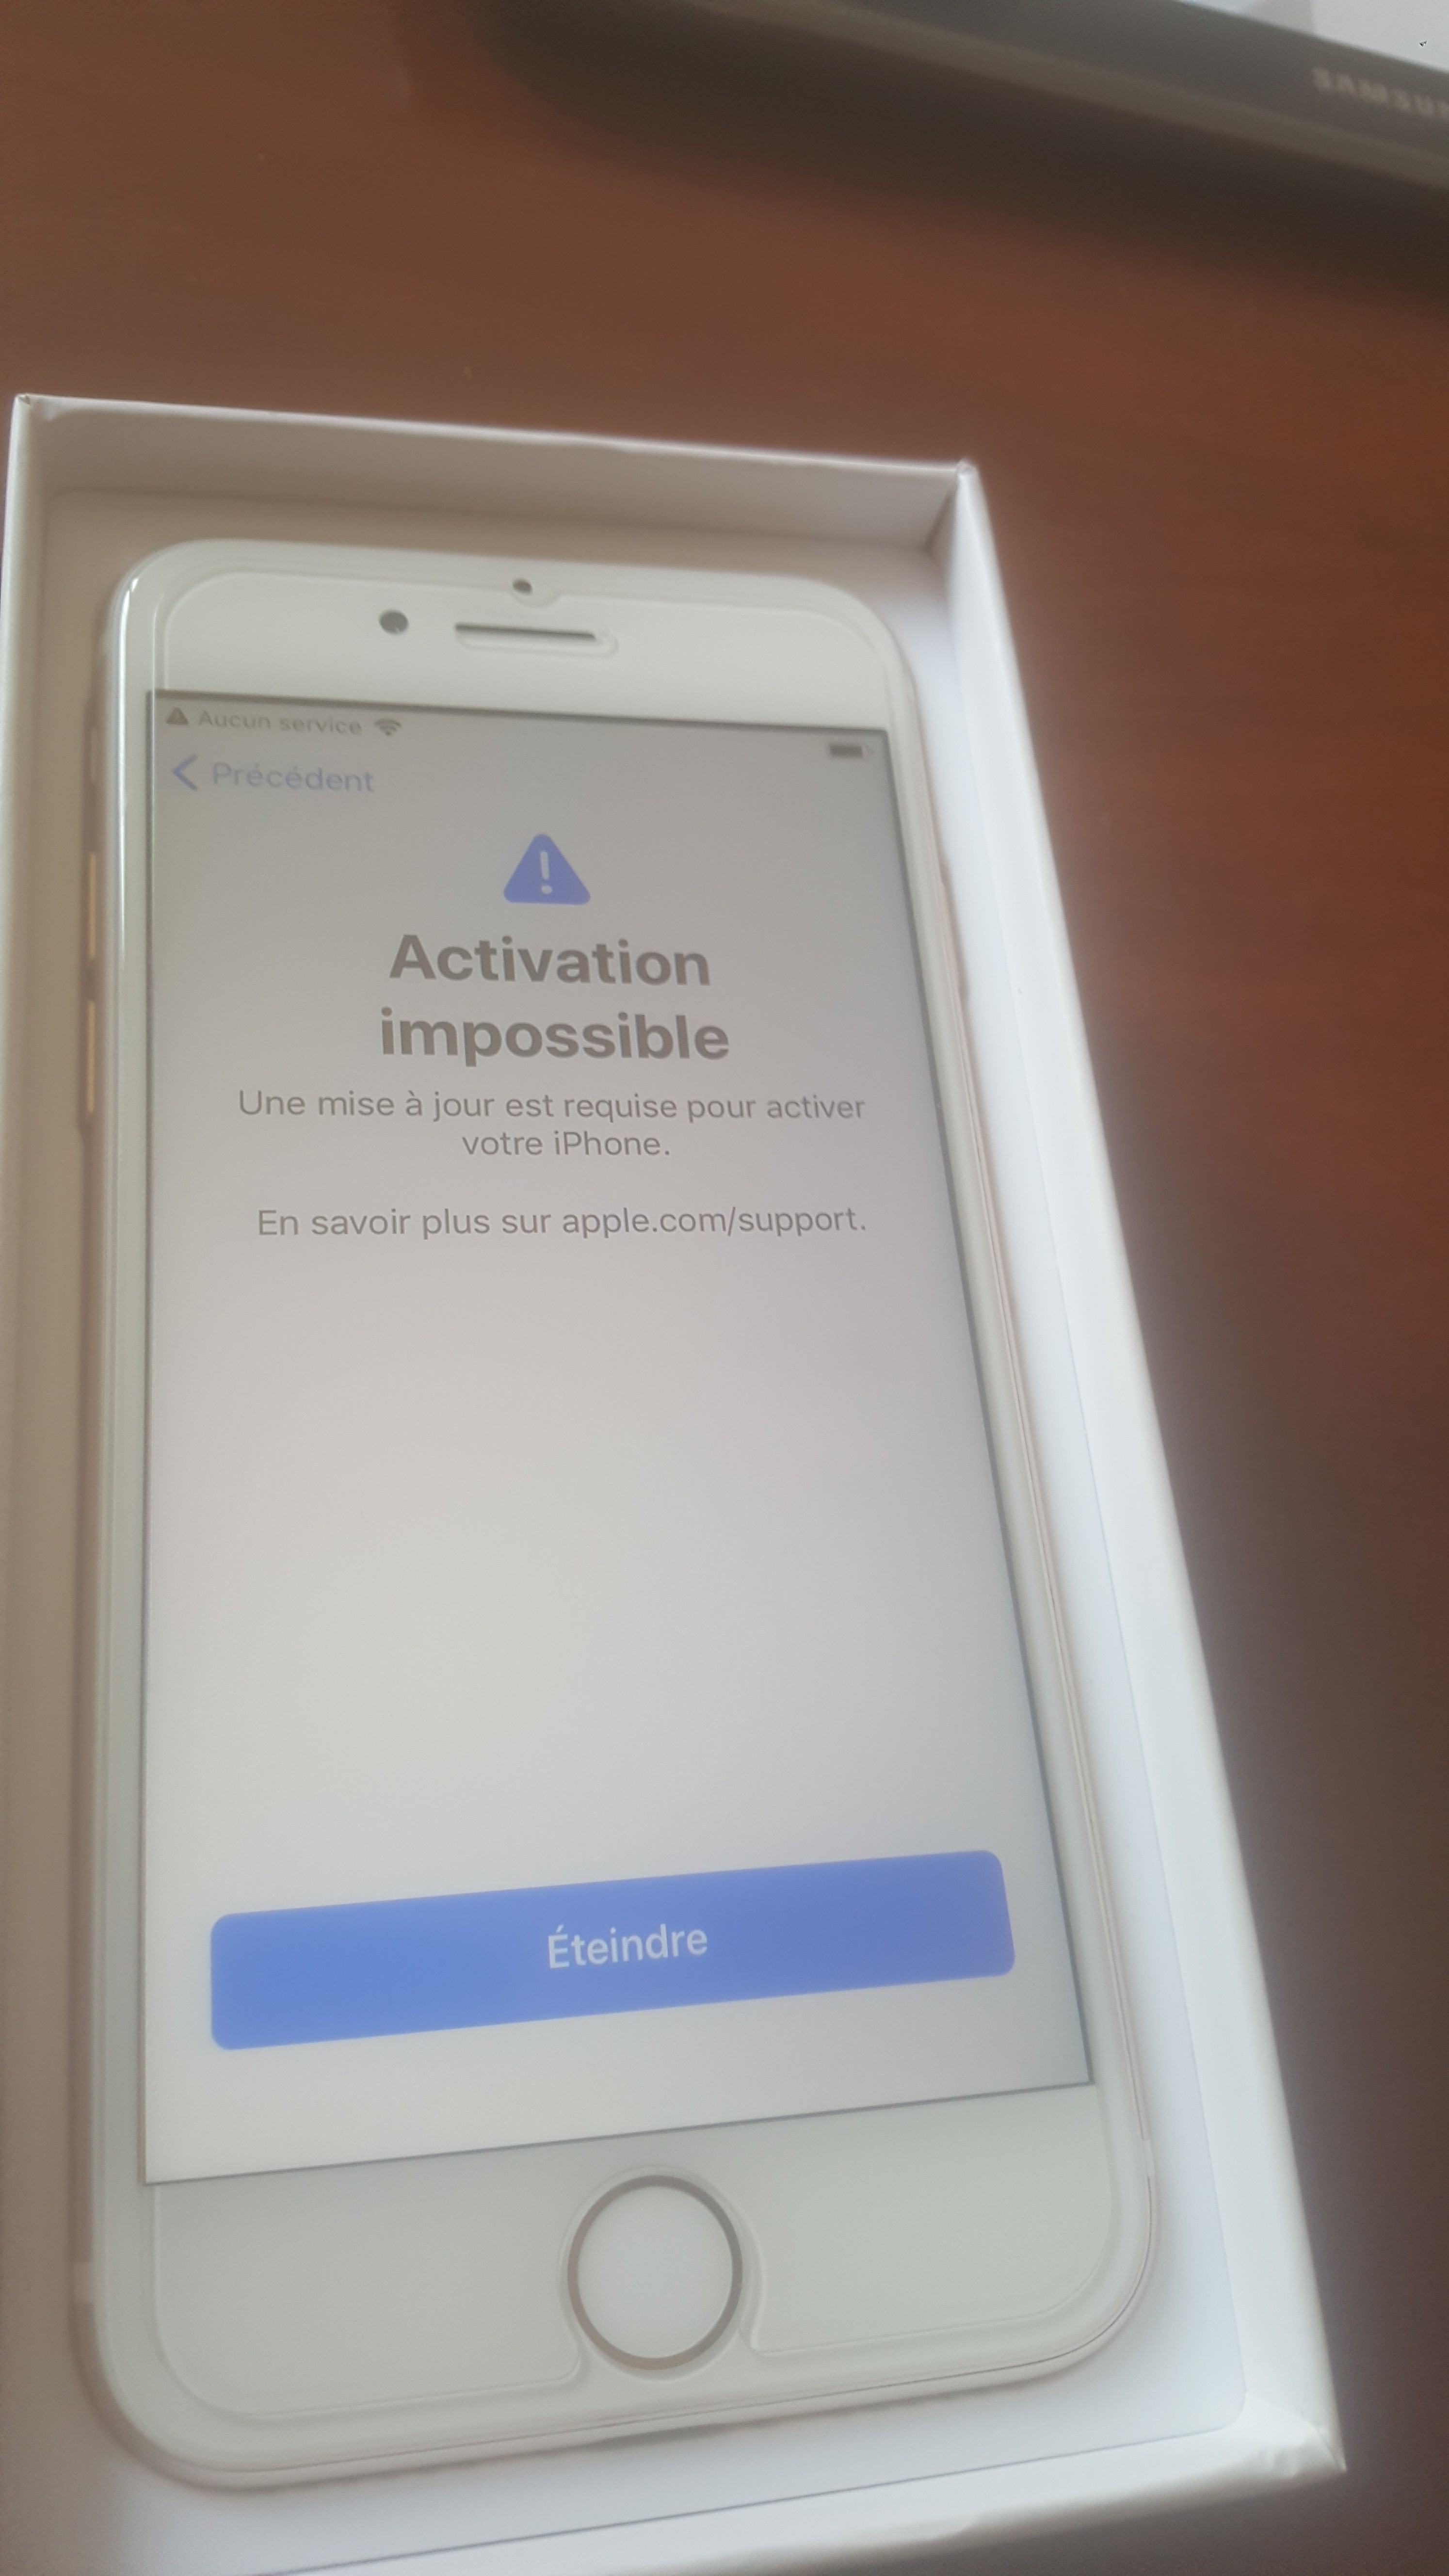 mise a jour application iphone impossible